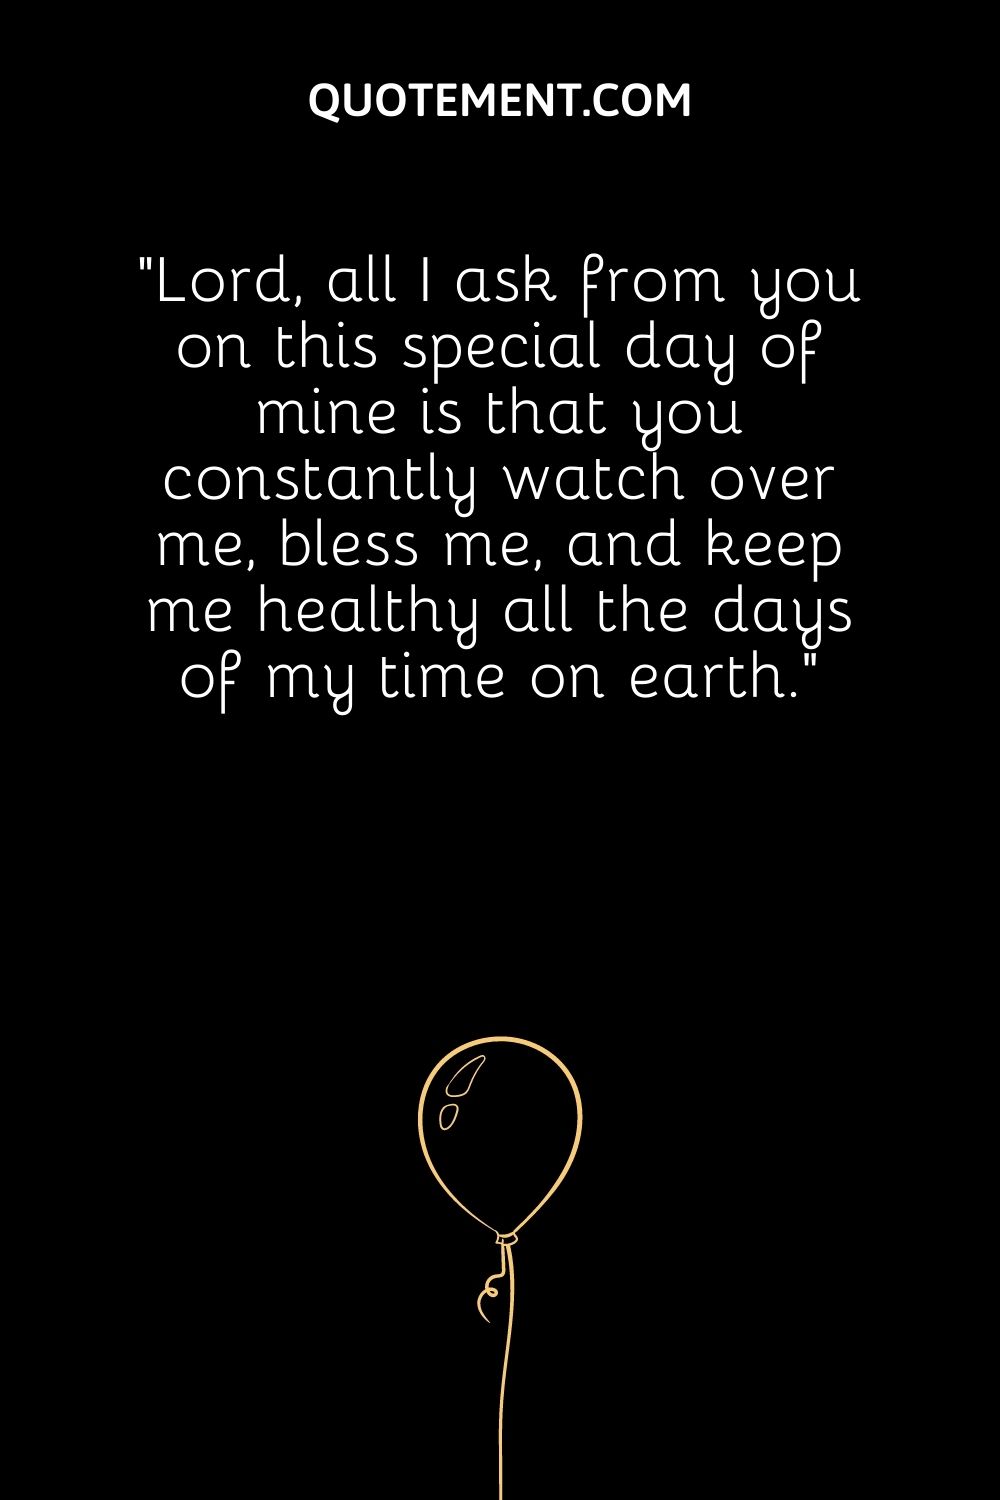 Lord, all I ask from you on this special day of mine is that you constantly watch over me, bless me, and keep me healthy all the days of my time on earth